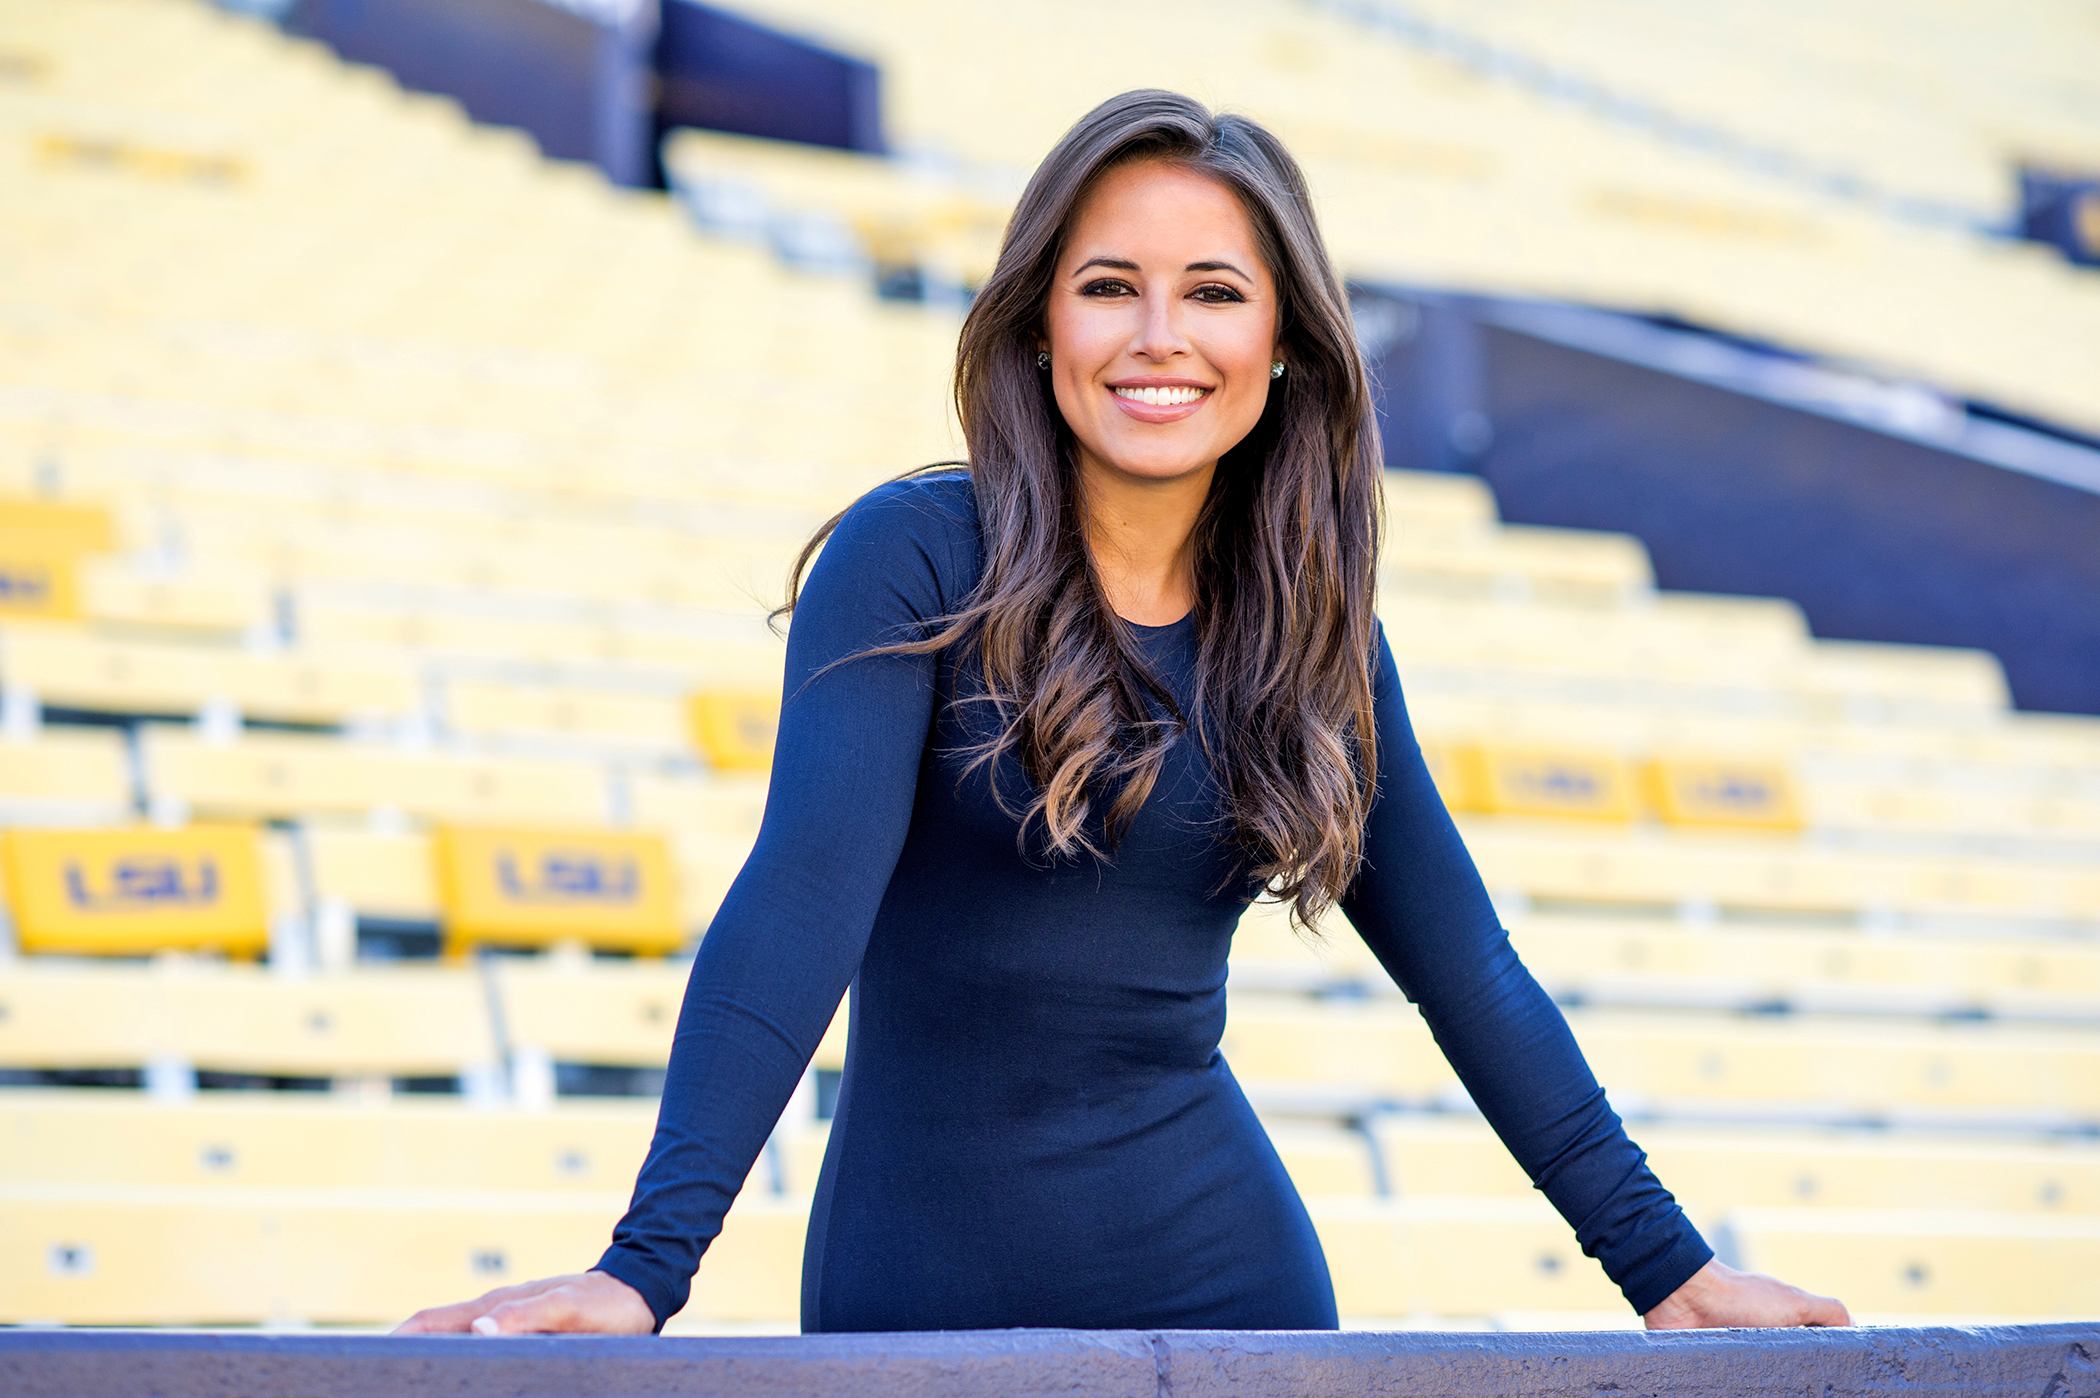 Taking the field: Kaylee Hartung is getting the scoop for ESPN - inRegister...